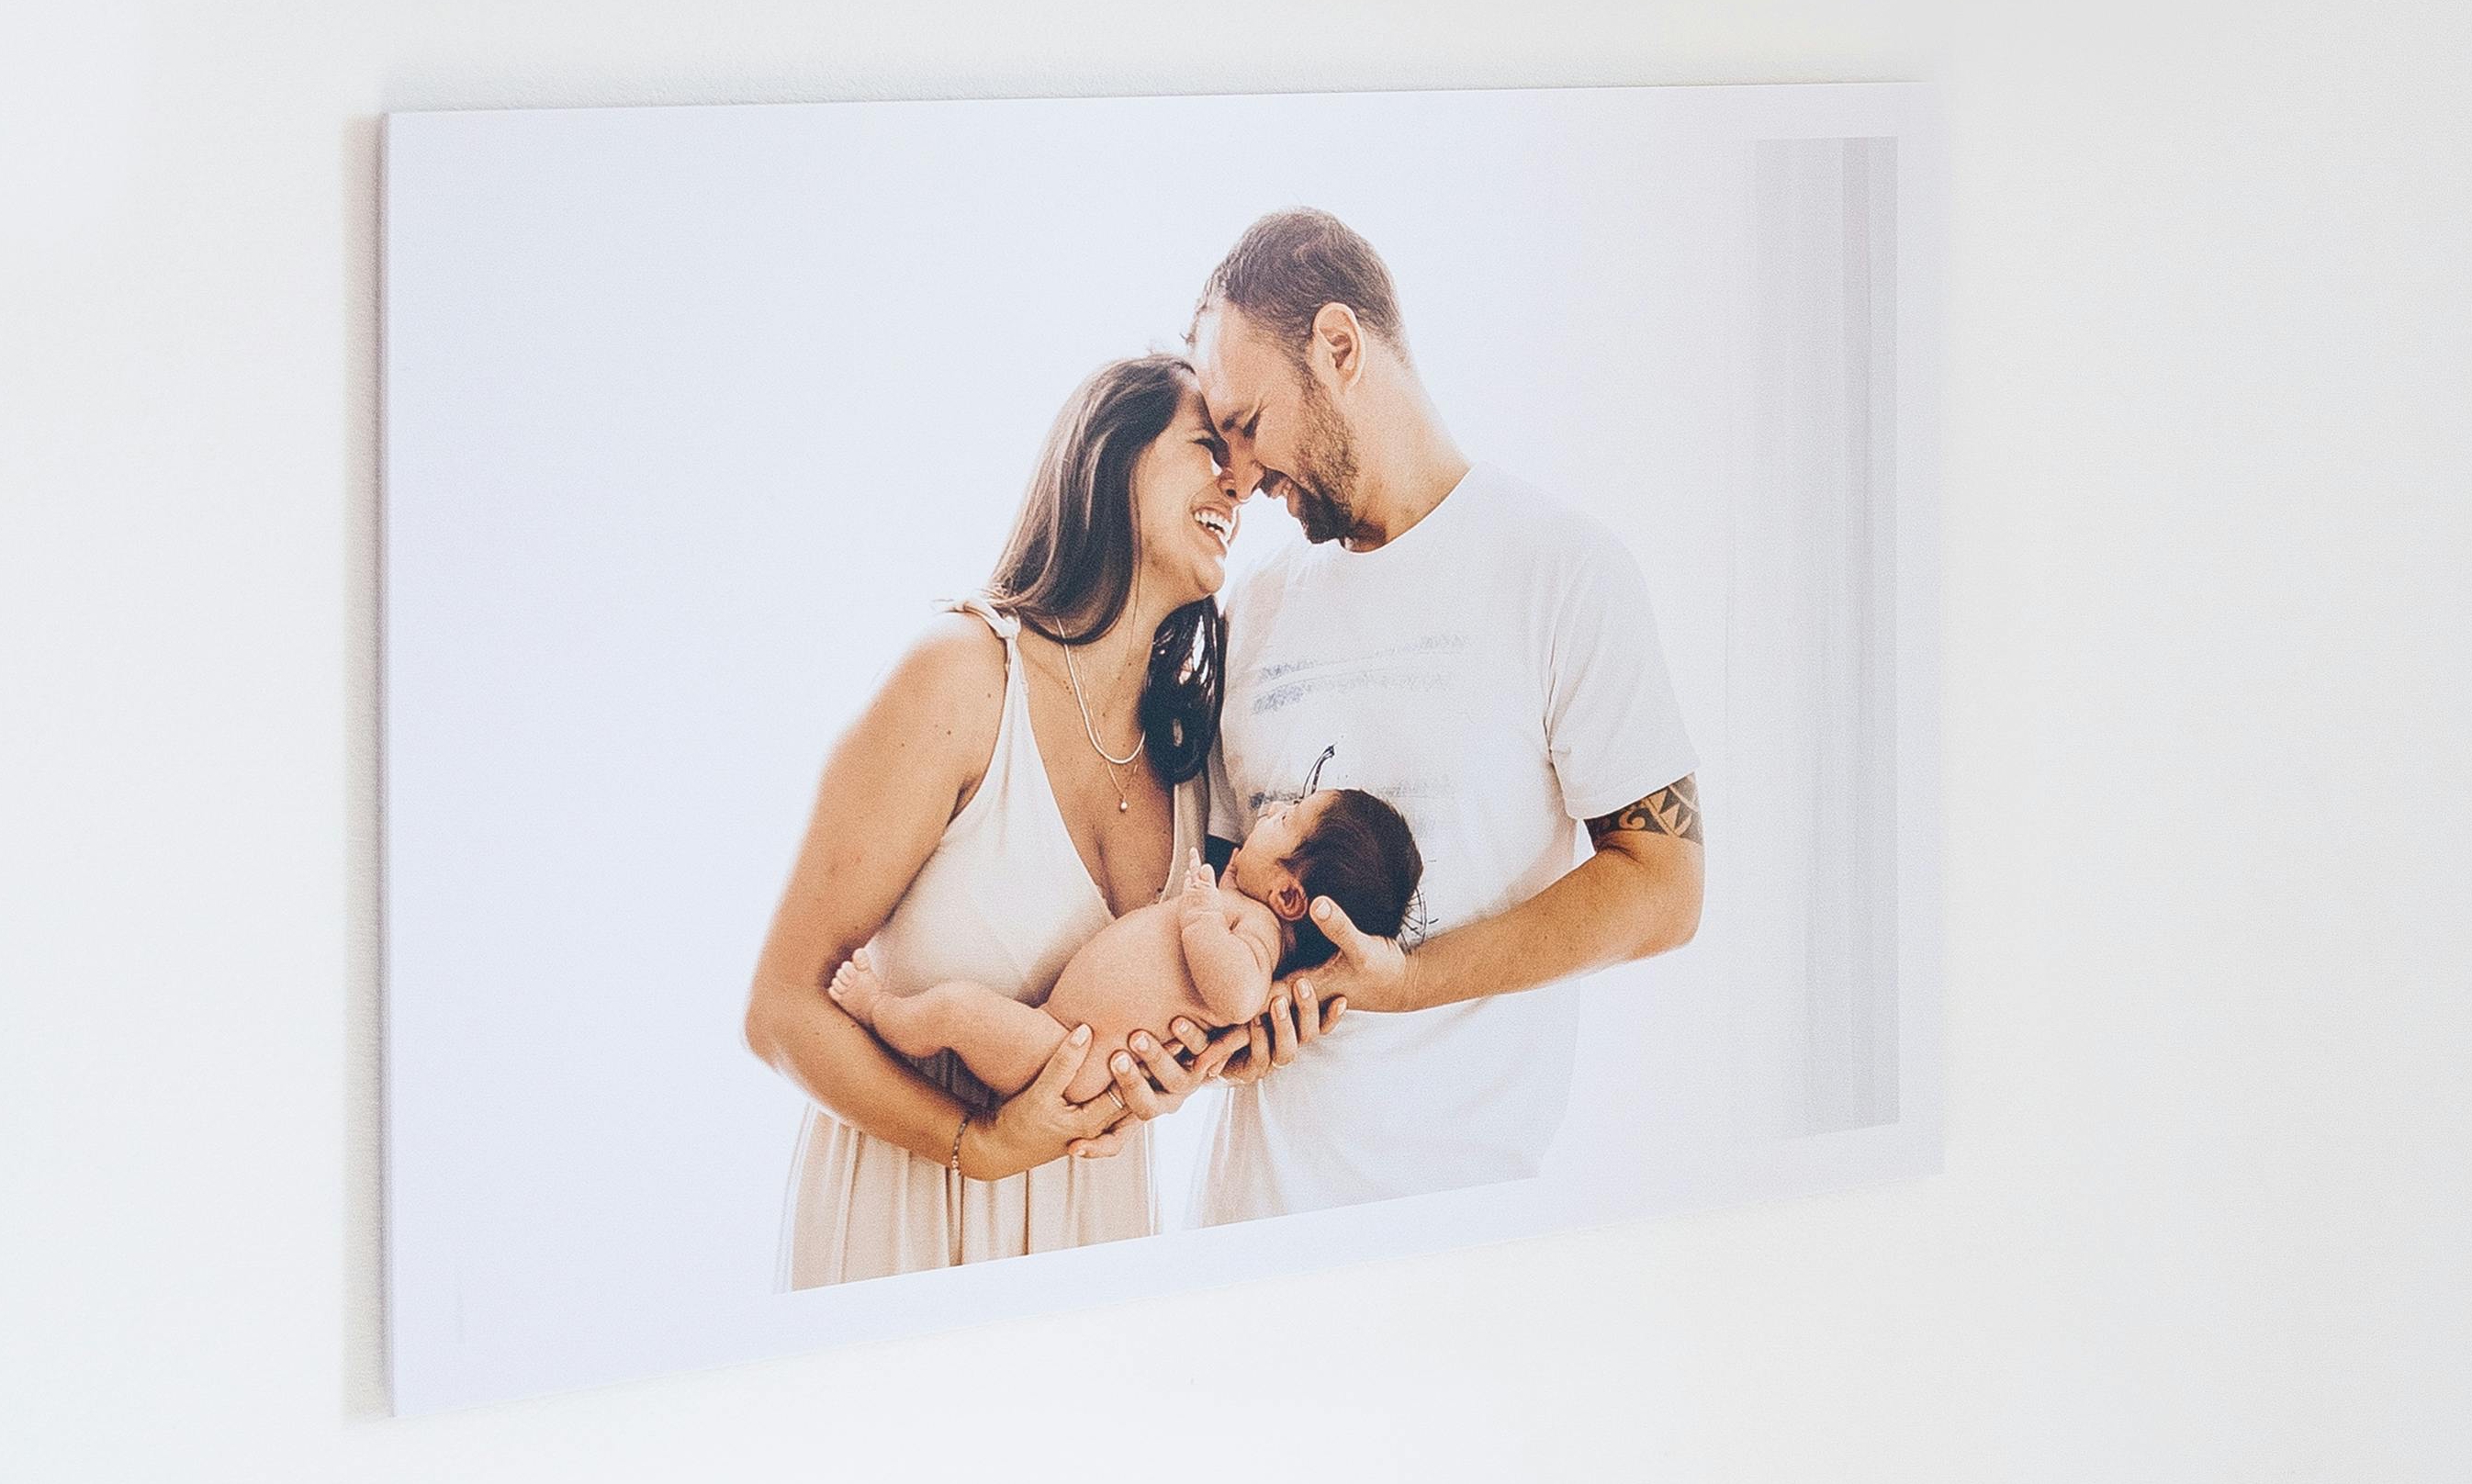 A new family photo replaces the insulting picture, symbolizing a fresh start | Source: Pexels